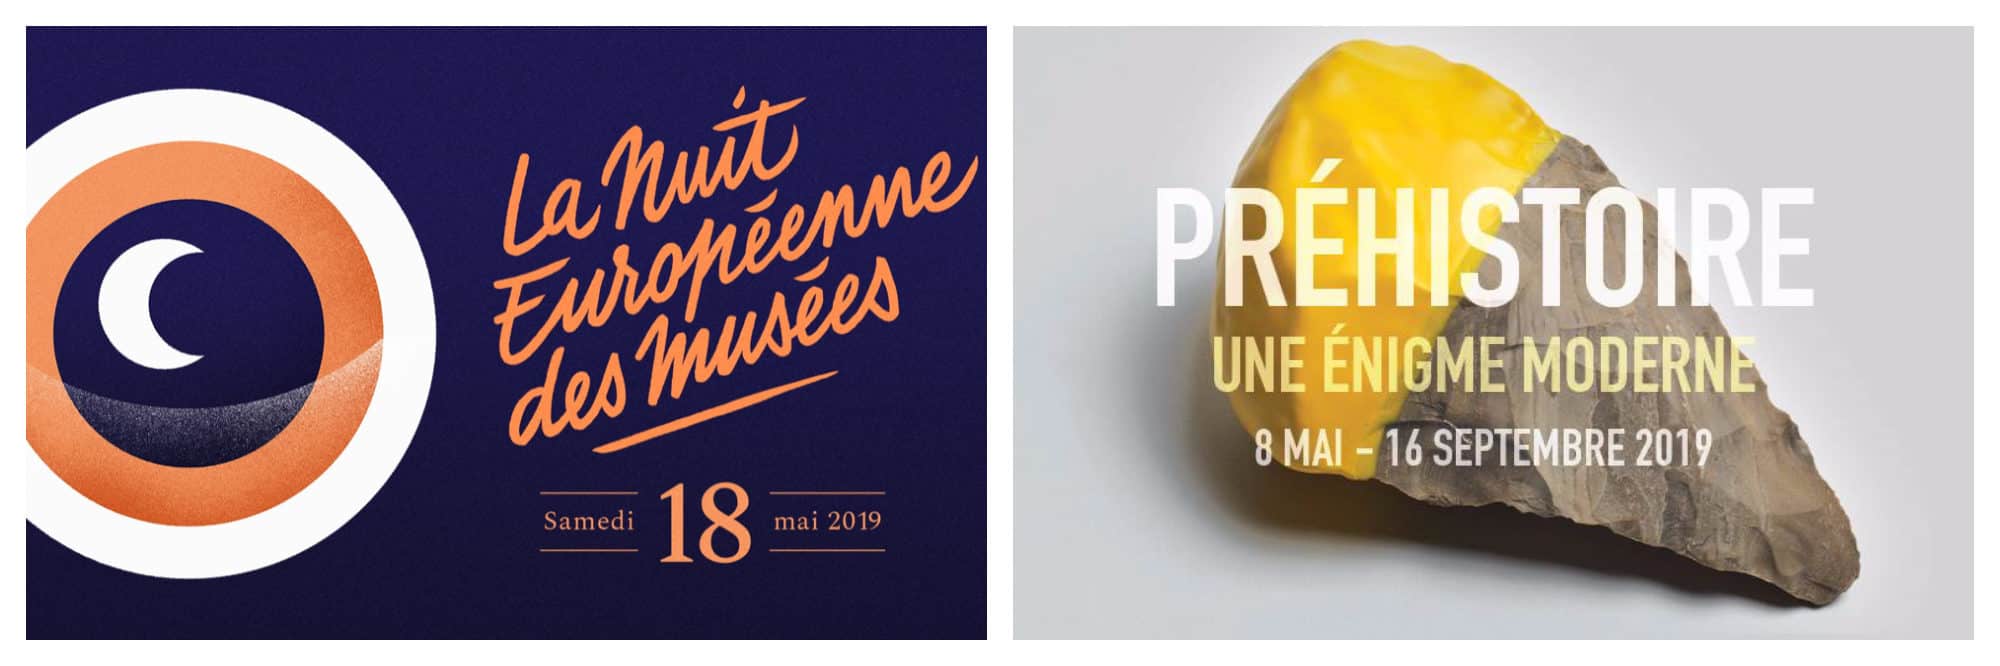 A poster for the Nuit Européenne des Musées event in Paris in May (left). A poster for a prehistory event in Paris this May (right).